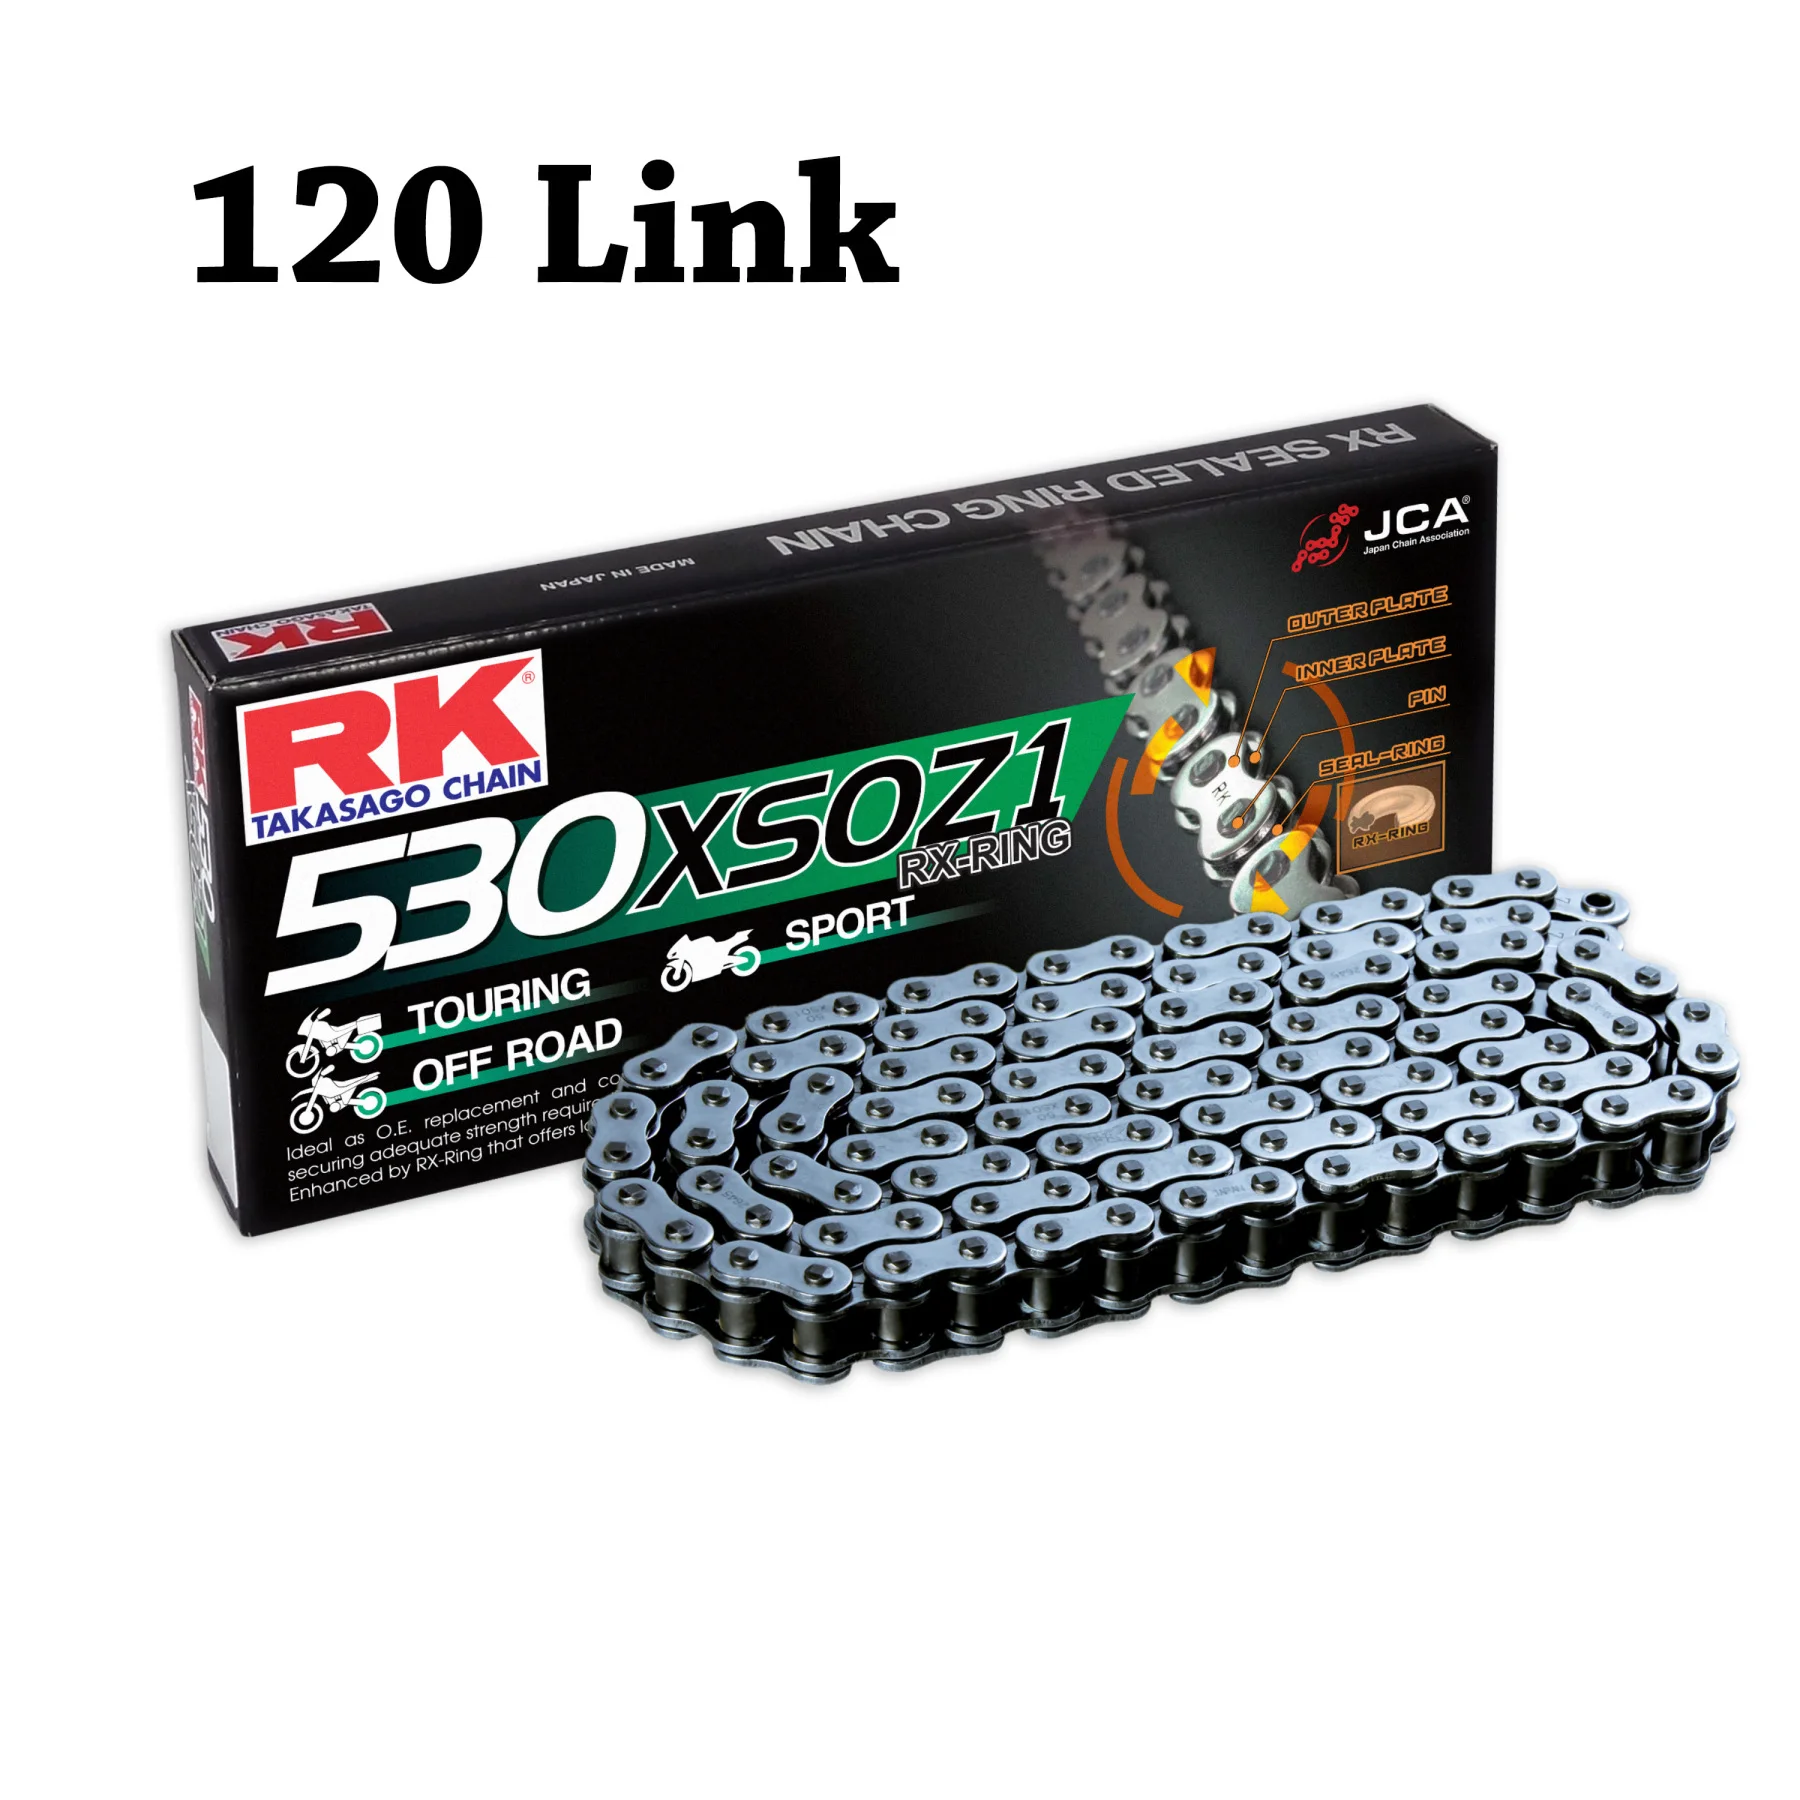 

RK Motorcycle Chain X-Ring 530 XSO 120 L for KTM 125-250-300-400-450-640-990-1190 EXC/SX/Adventure/SC/SMX/SXC/Duke/MXC/EGS/RC8